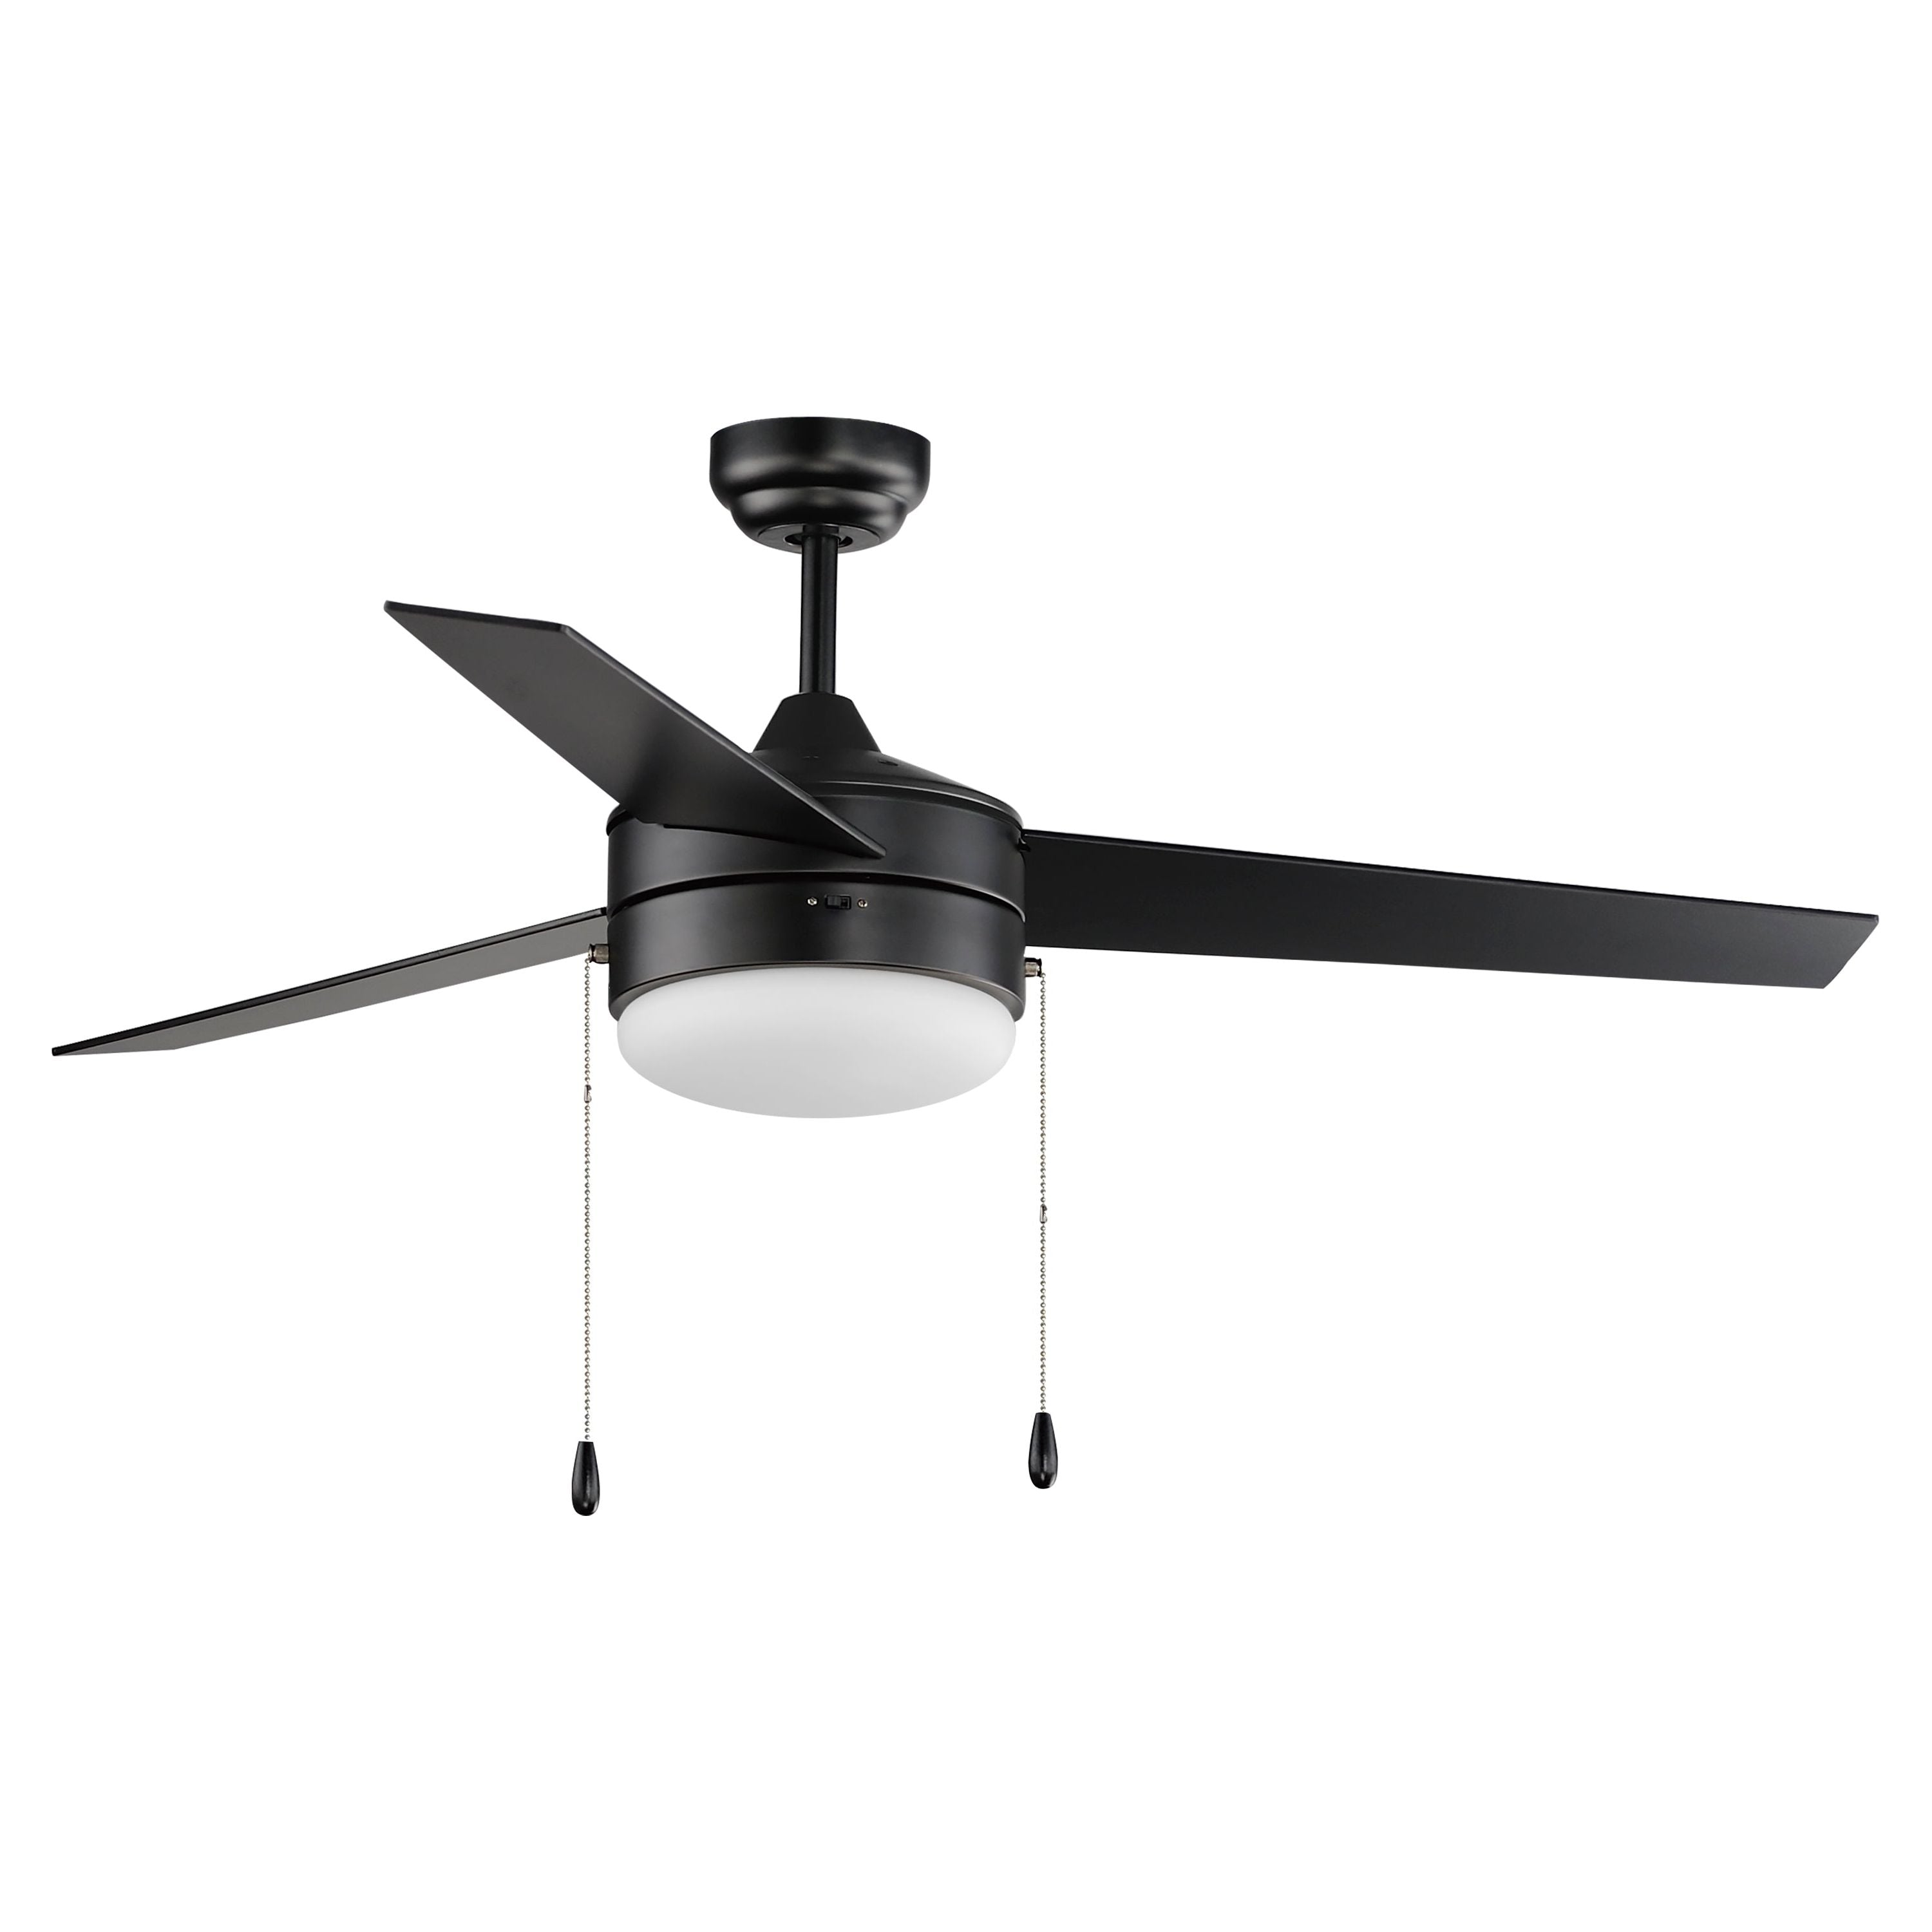 Trio 52" 3-Blade Hugger Fan with Pull Chain